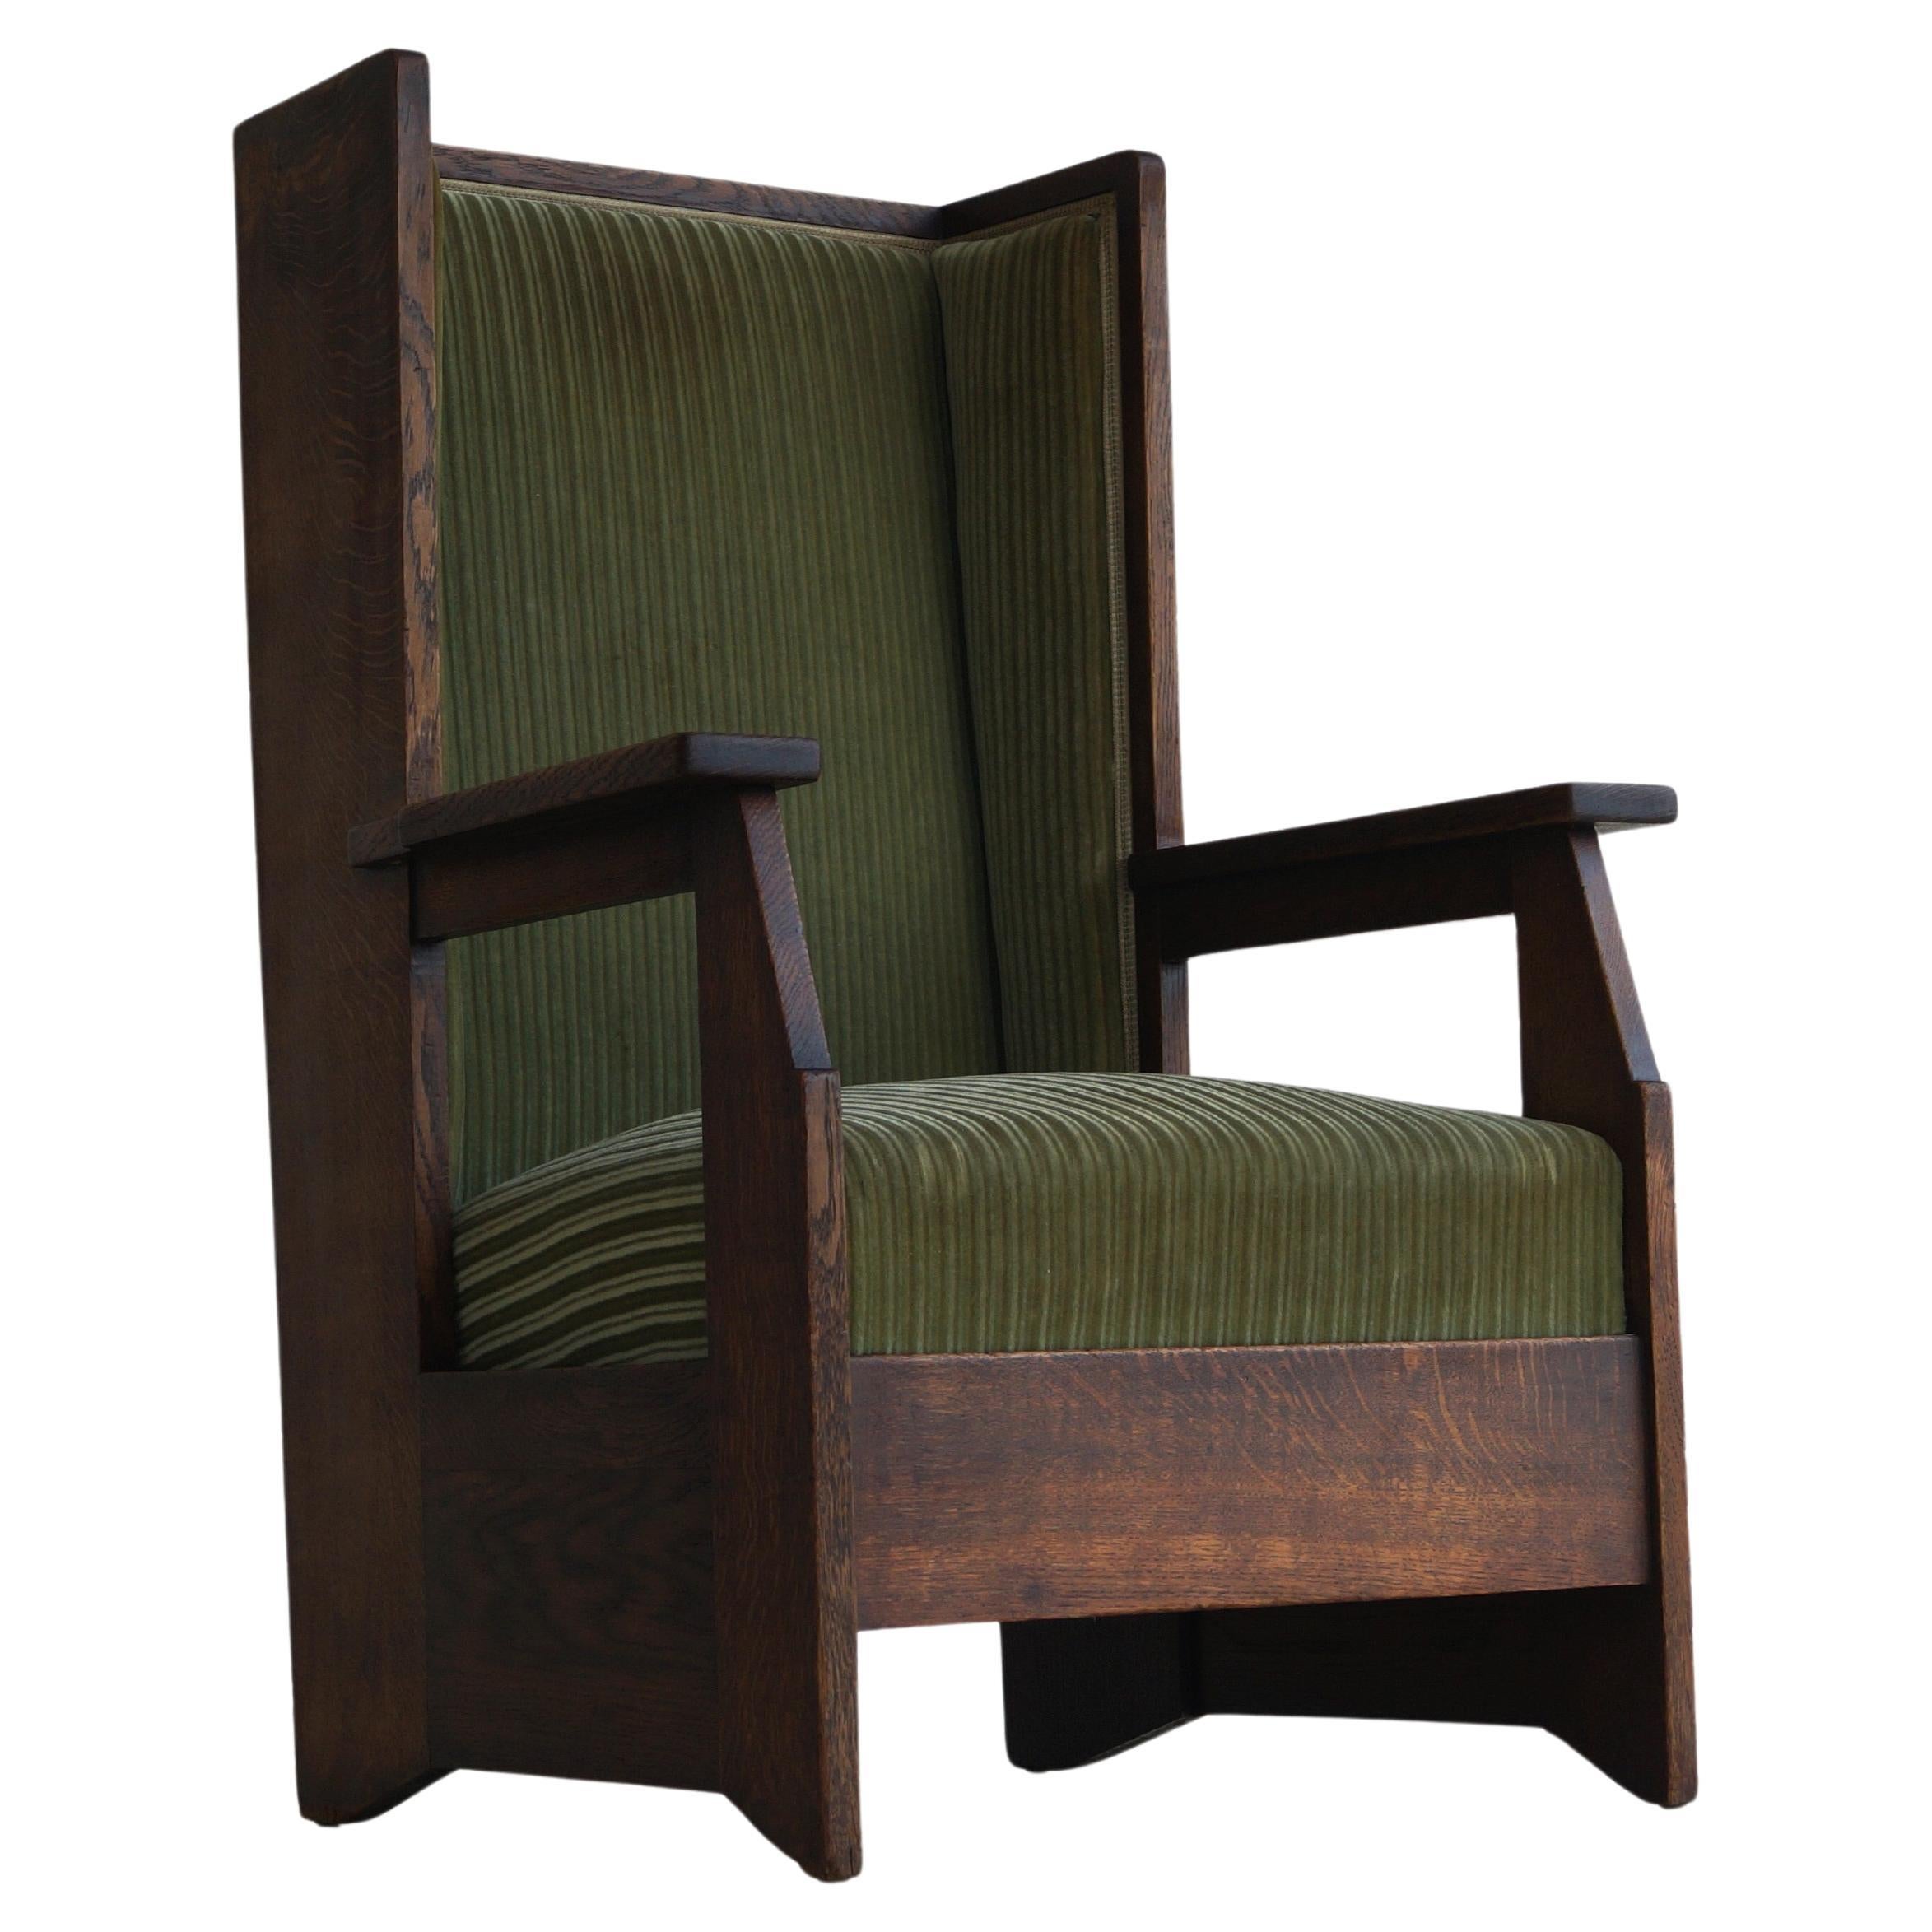 Dutch Art Deco Haagse School high back chair by Hendrik Wouda for Pander, 1924 For Sale